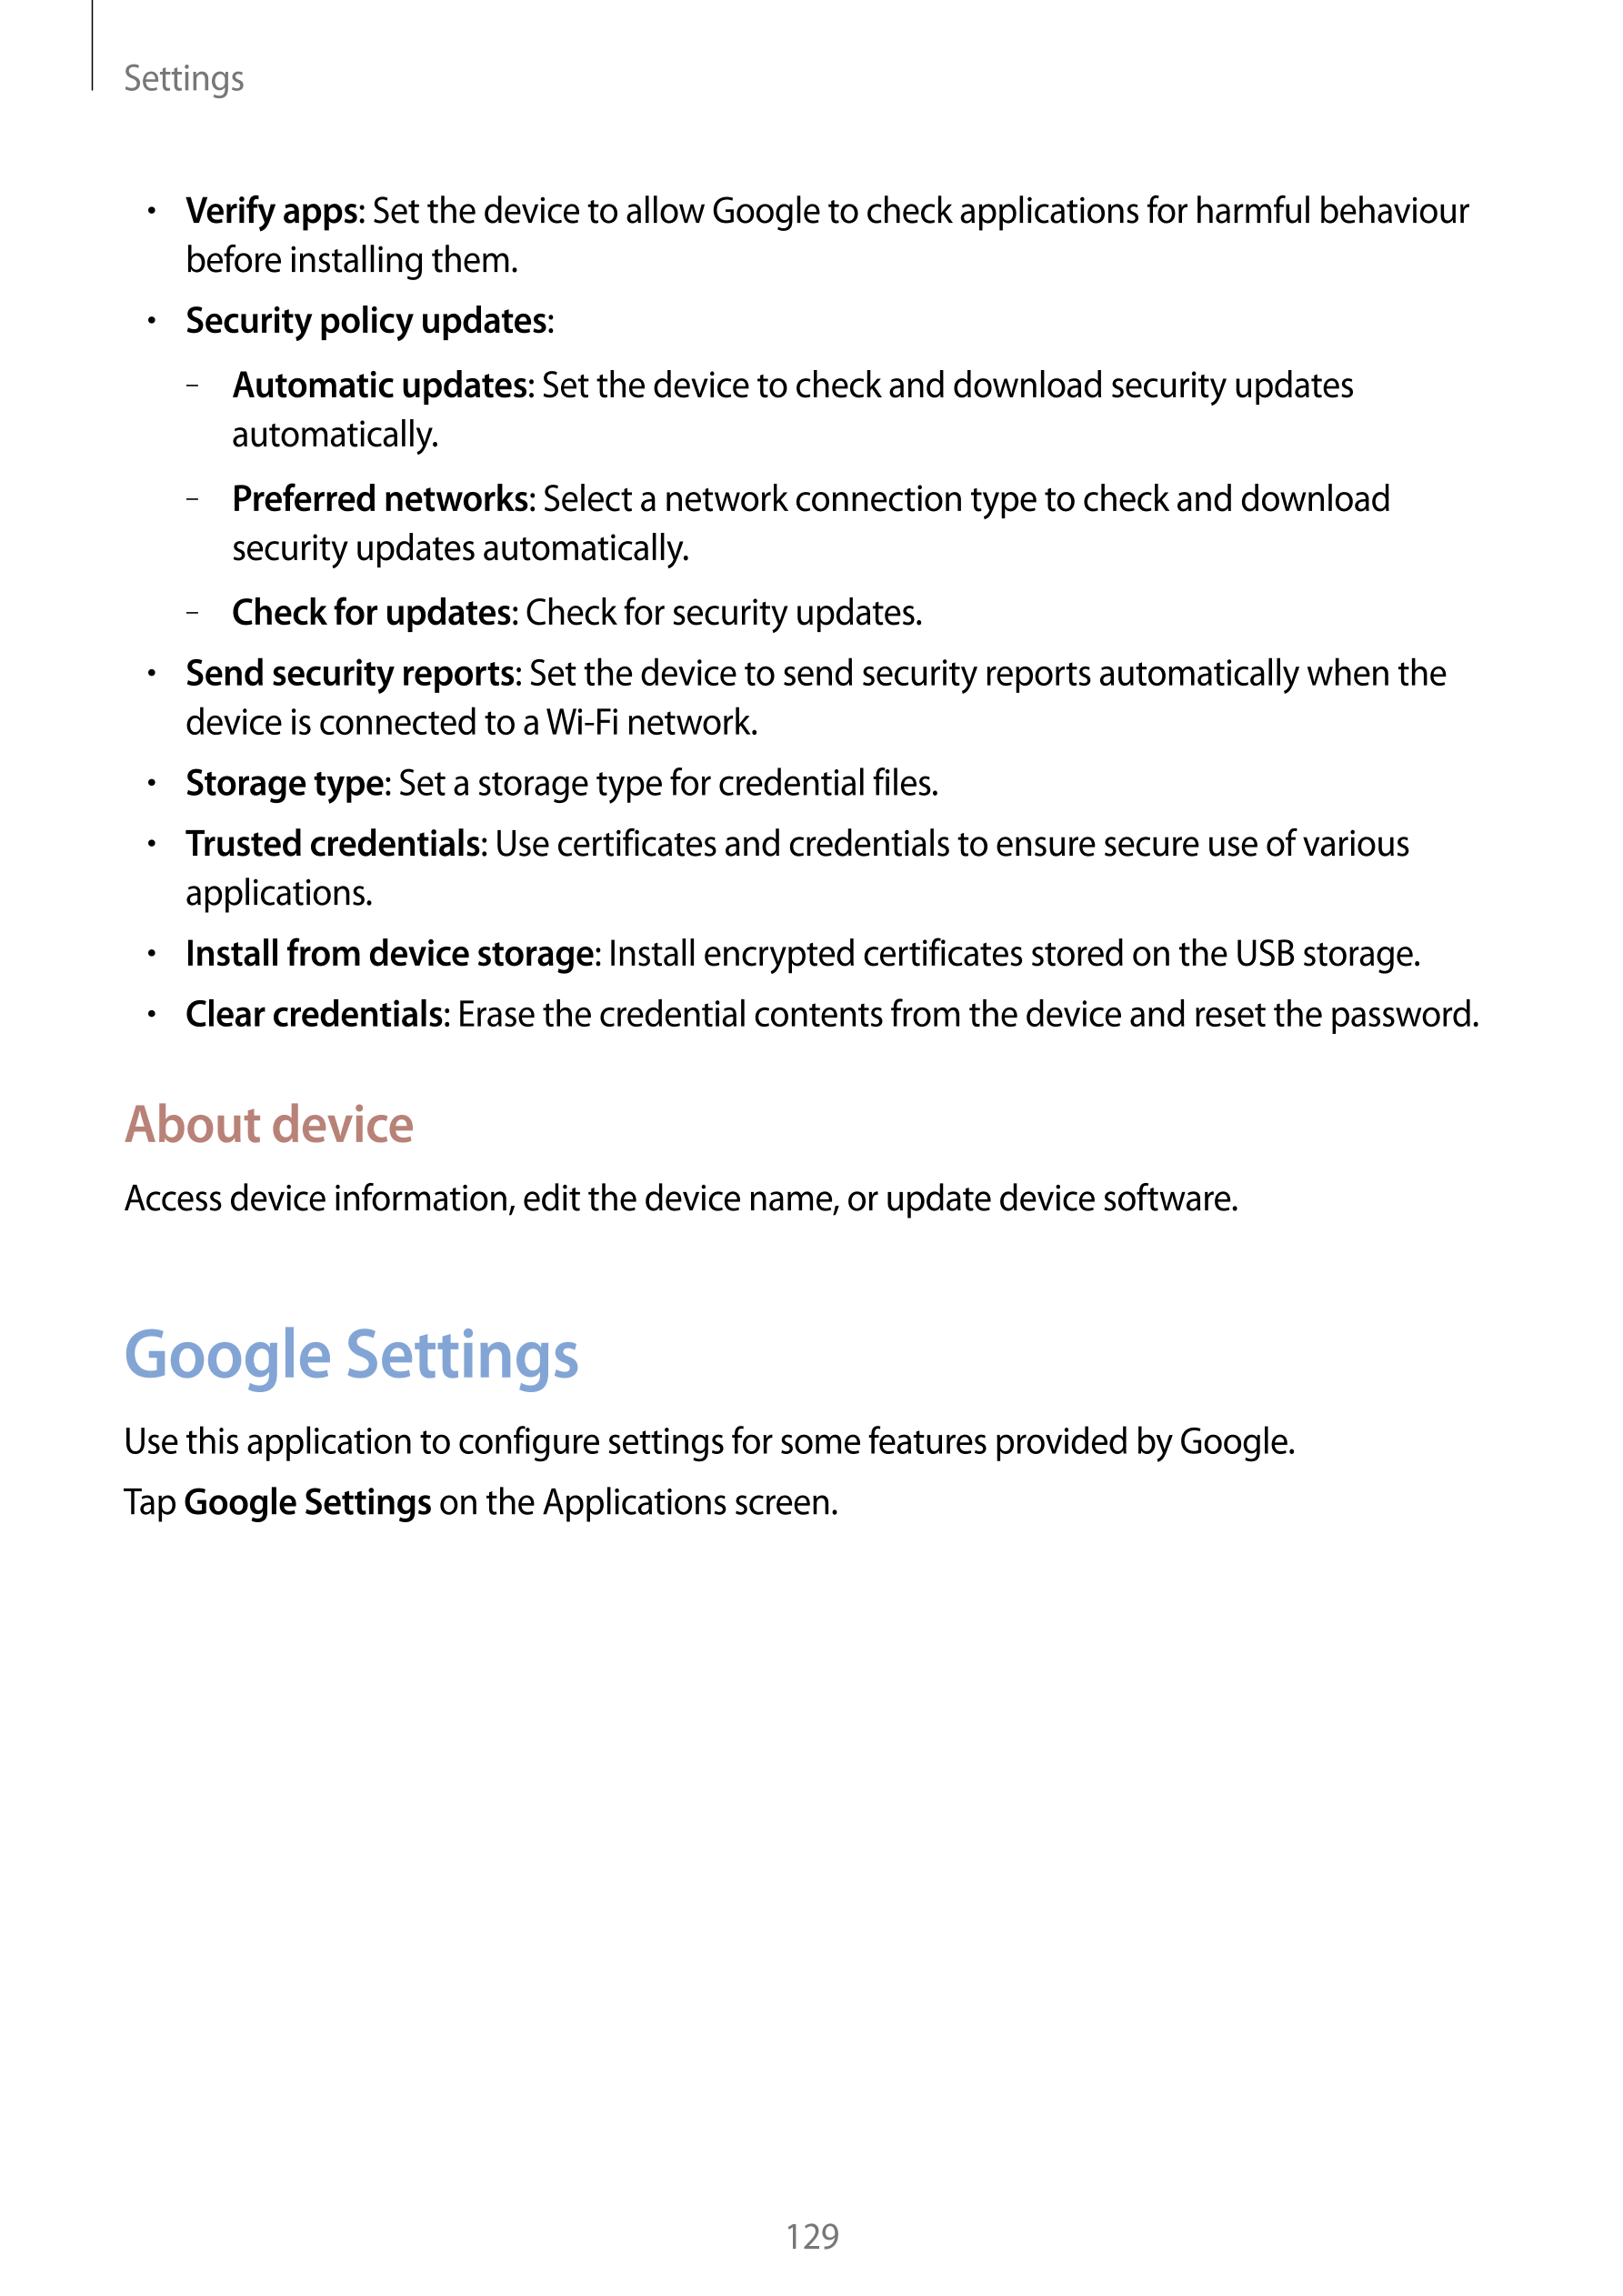 Settings
•     : Set the device to allow Google to check applications for harmful behaviour Verify apps
before installing them.
